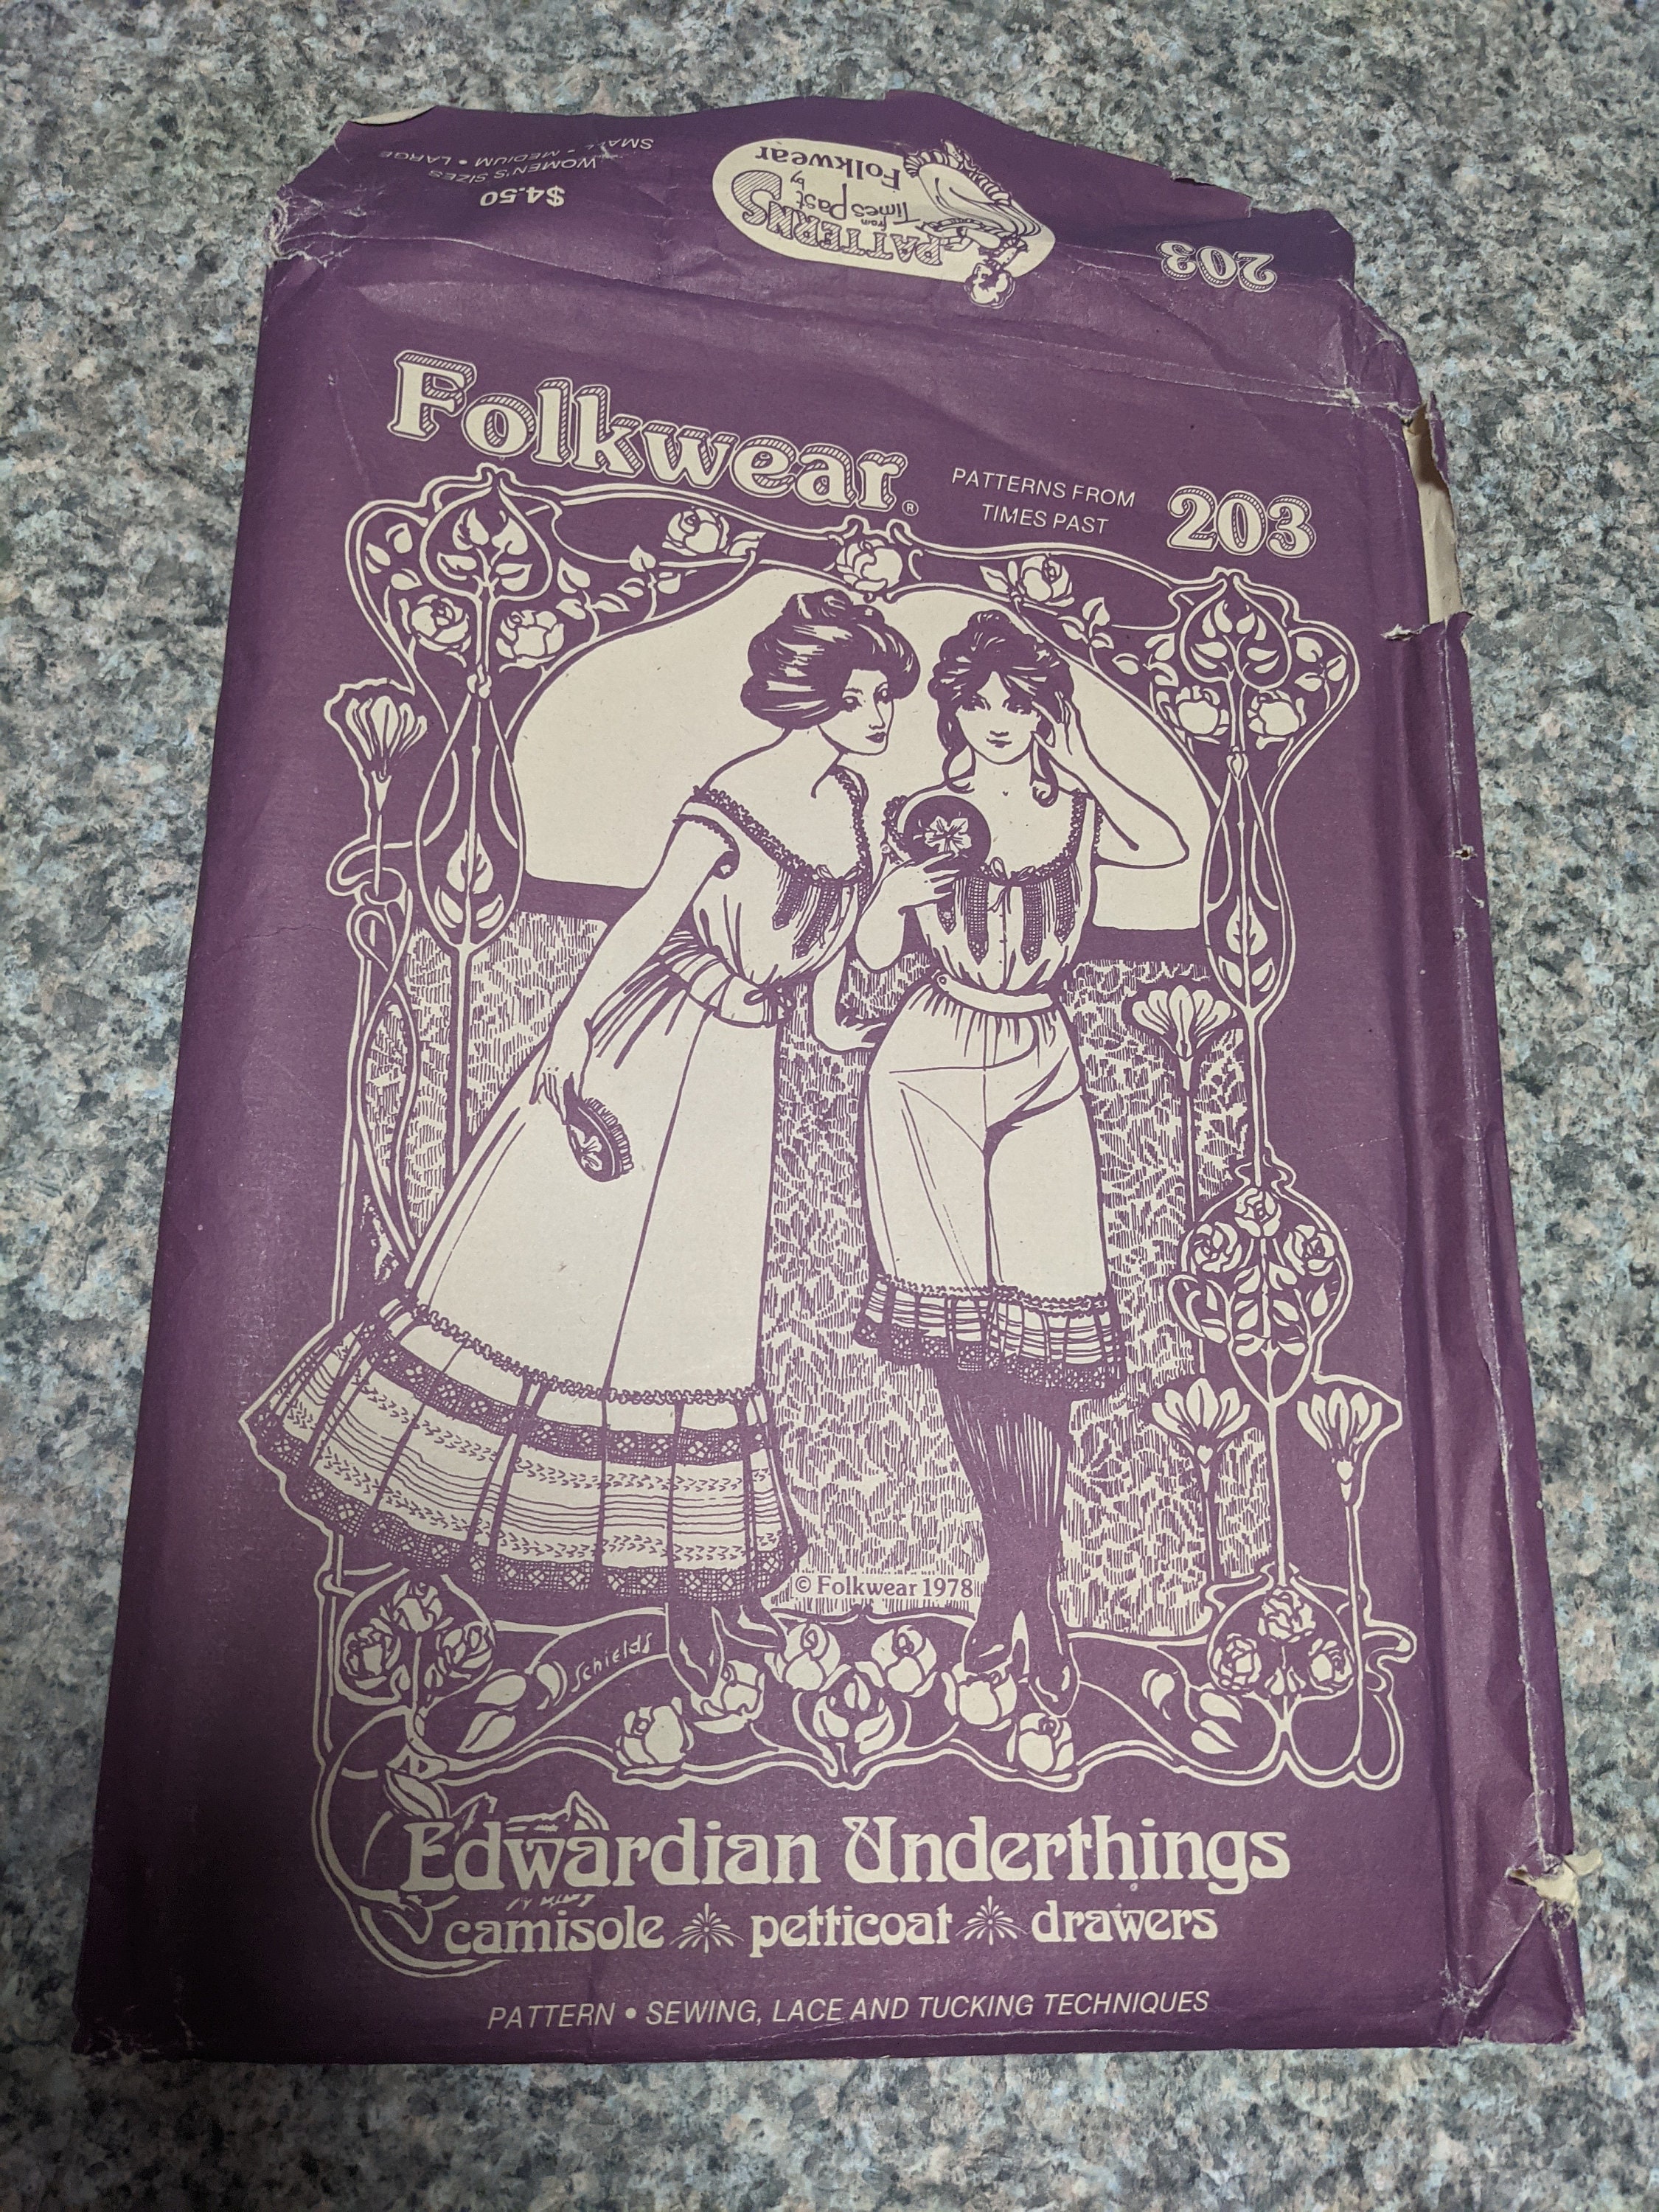  Folkwear #203 Edwardian Underthings Undergarments Camisole  Petticoat Drawers Sewing Pattern (Pattern Only) : Arts, Crafts & Sewing